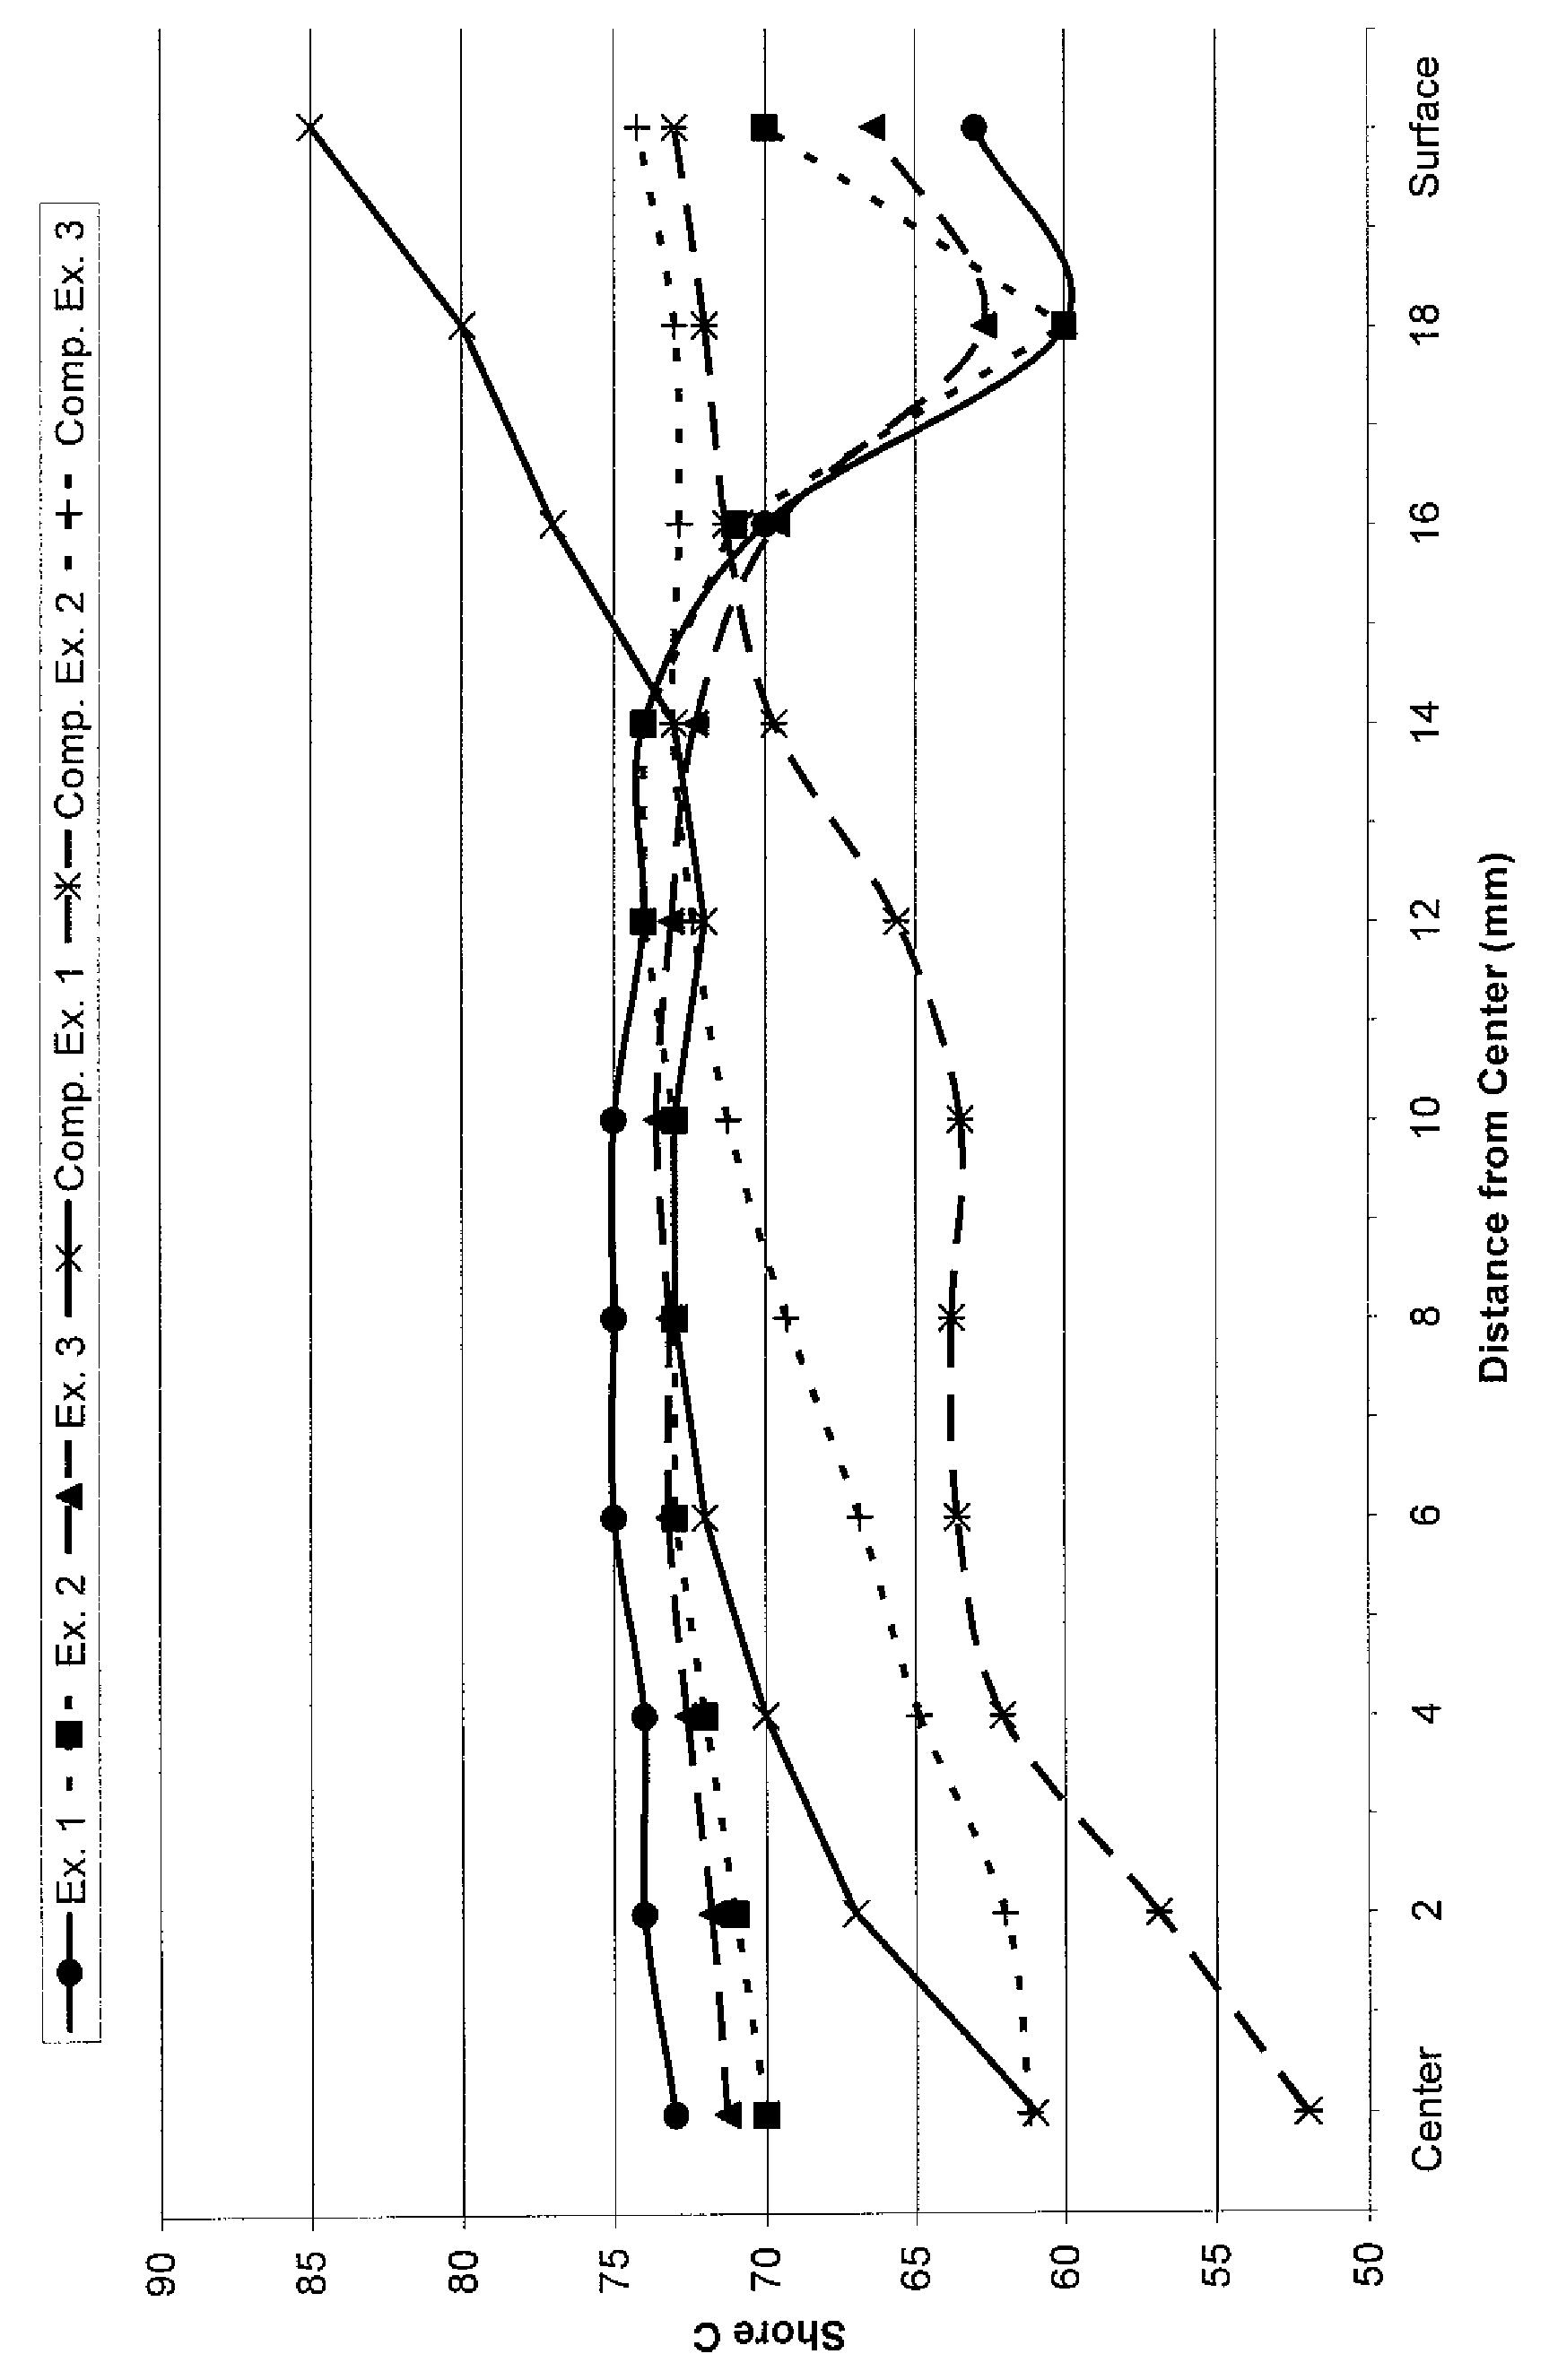 Golf ball with negative hardness gradient core